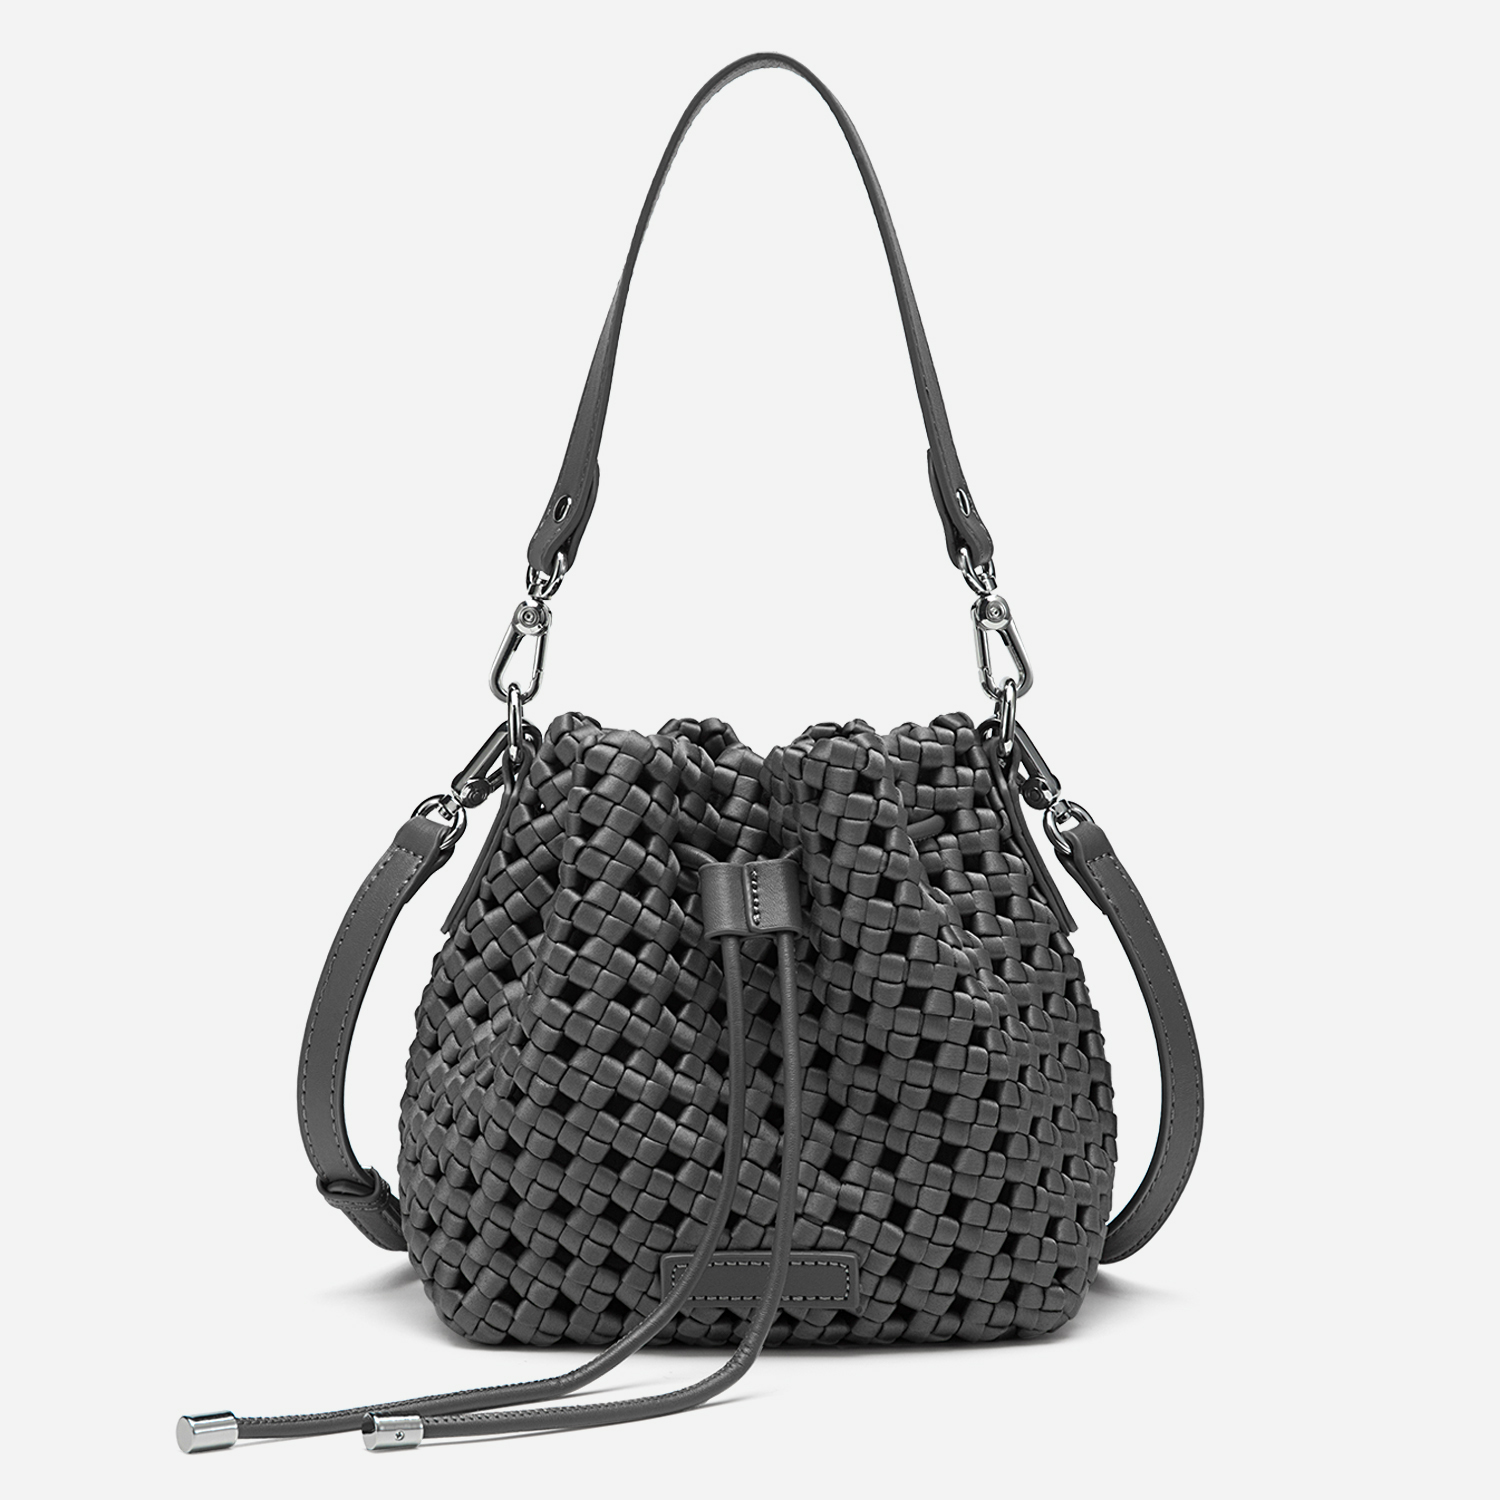 Windmill Knot Hollow-out Handmade Woven Handle Bucket Bags